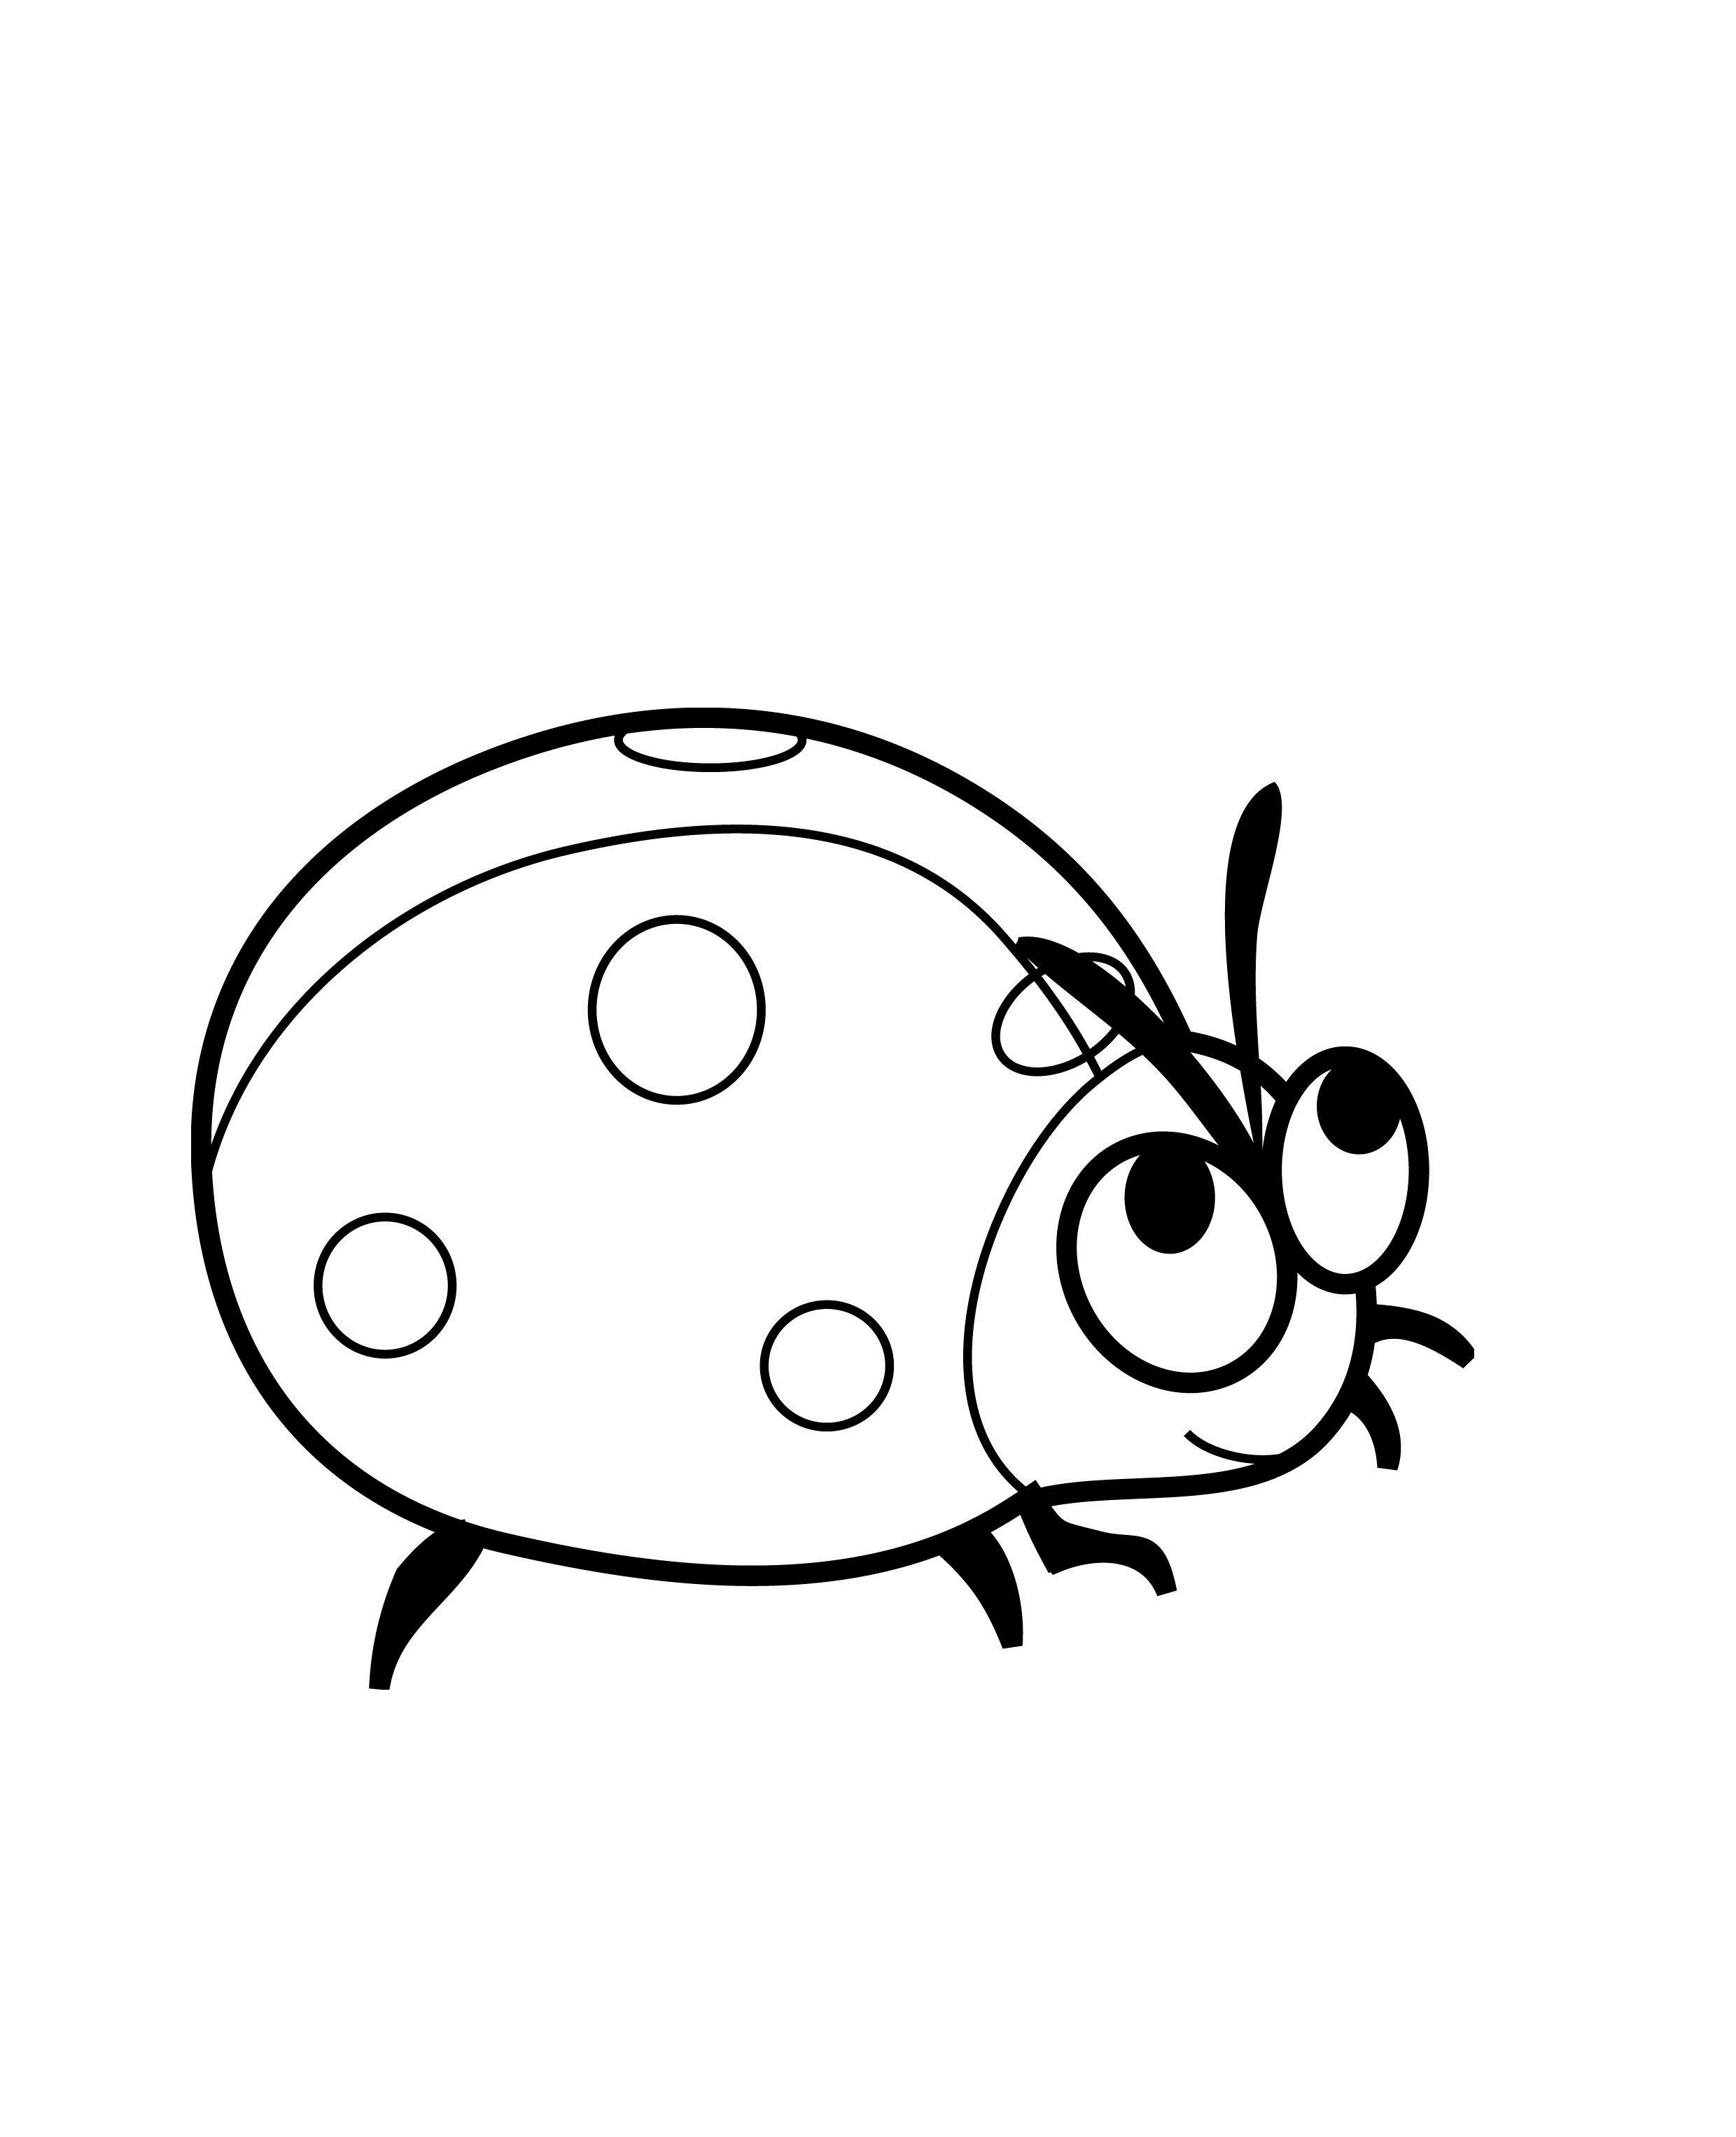 Picture Of Ladybug To Color